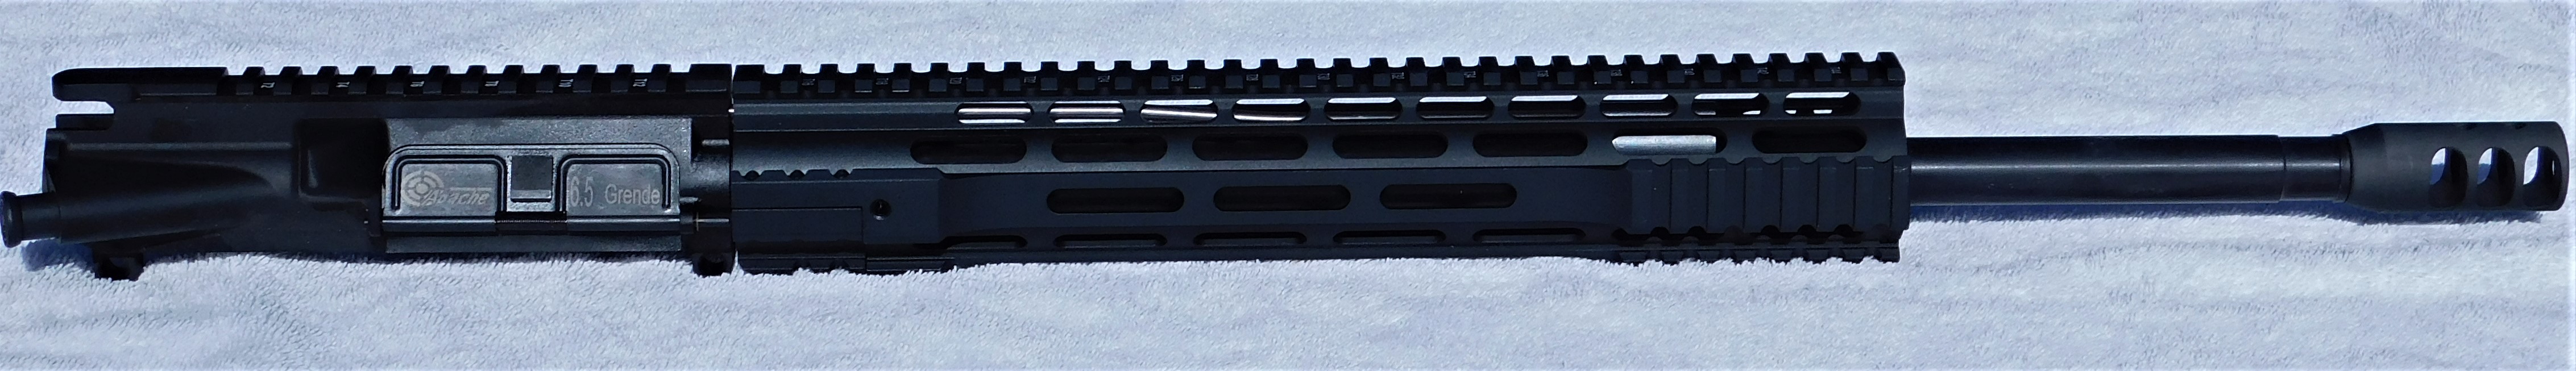 6.5 Grendel 18 inch QPQ with 12 inch Contour Hand Guard 